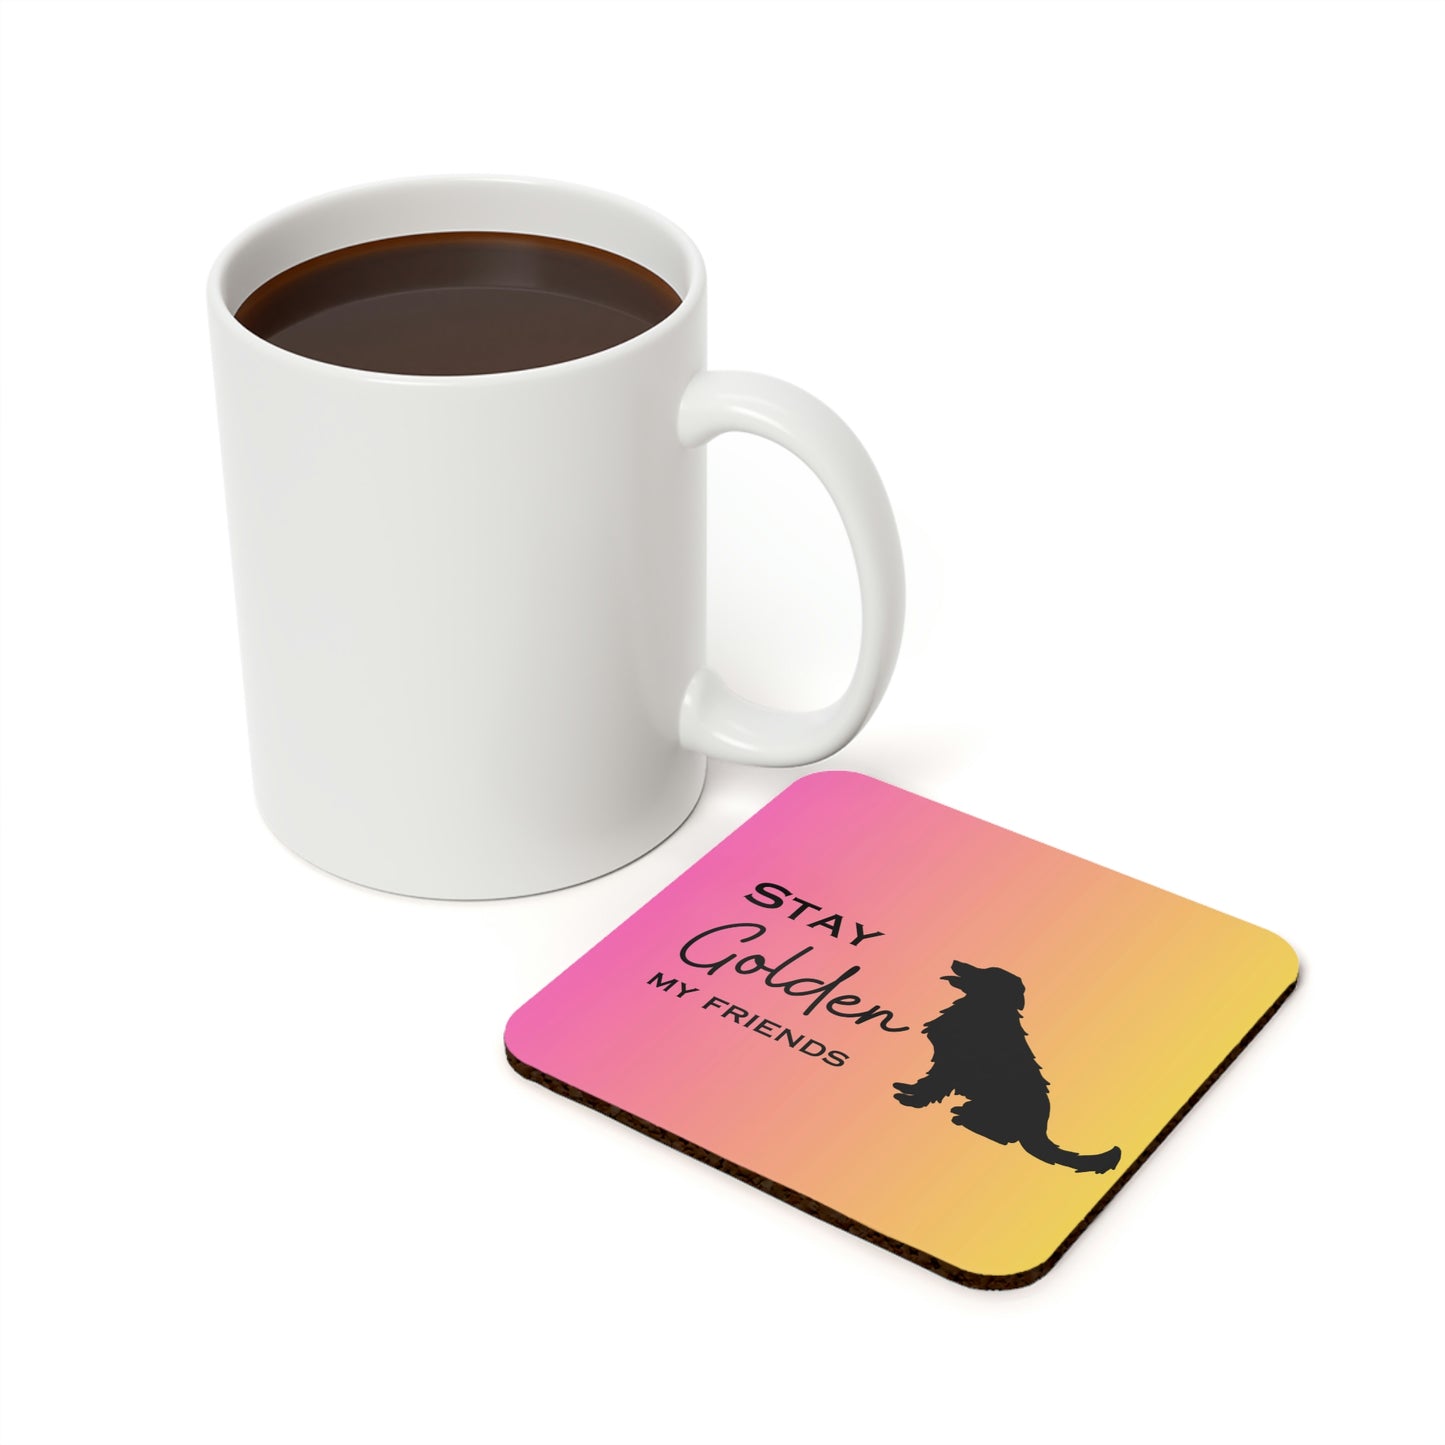 Stay Golden My Friends Cork Back Coaster (Pink/Yellow Ombre)